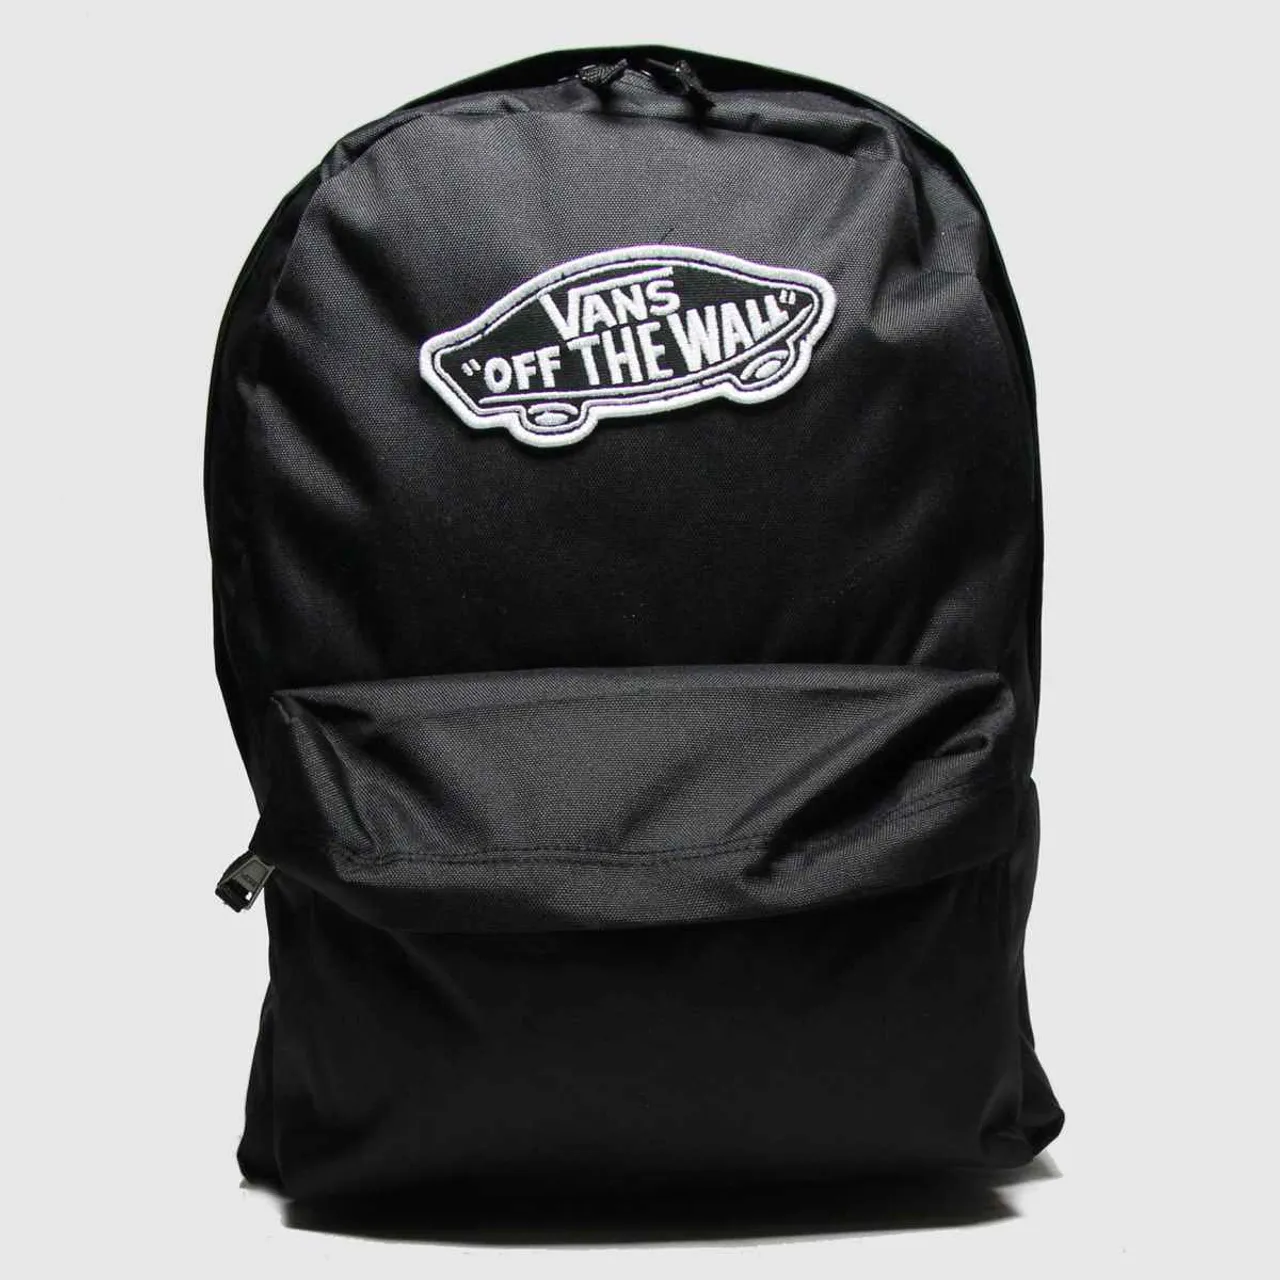 Vans Black & White Realm Backpack, Size: One Size